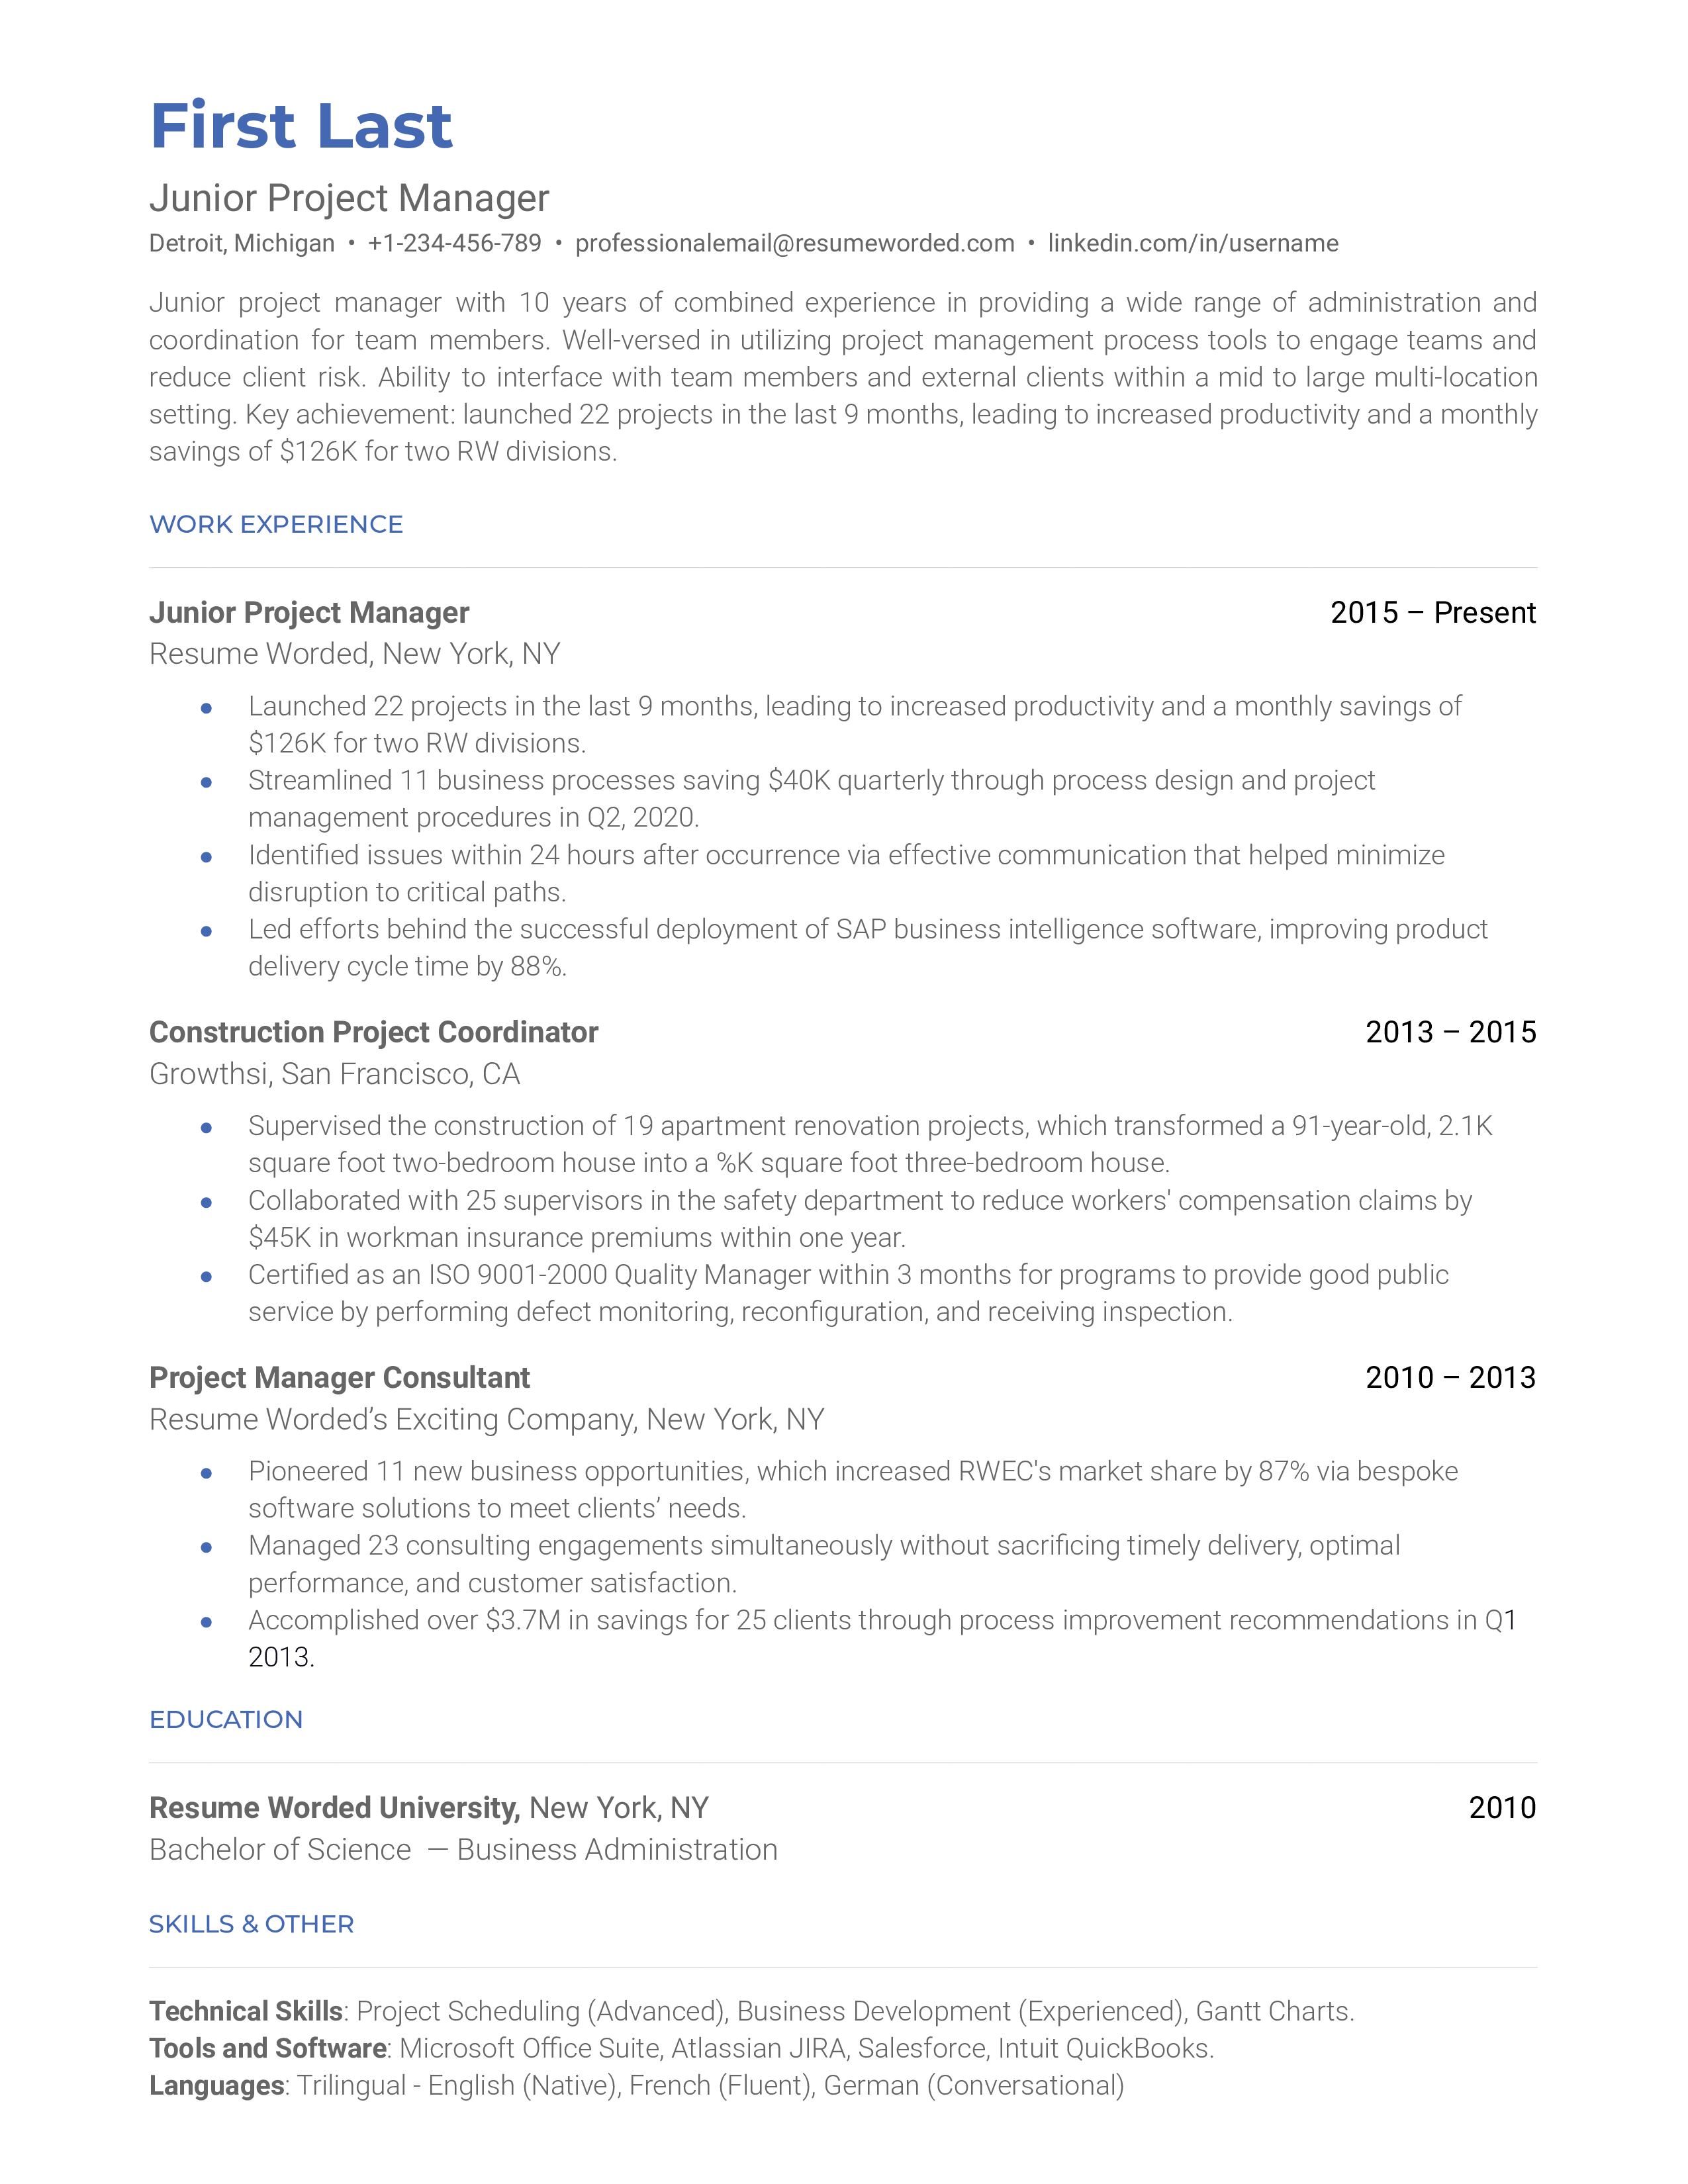 A CV screenshot for a Junior Project Manager role.